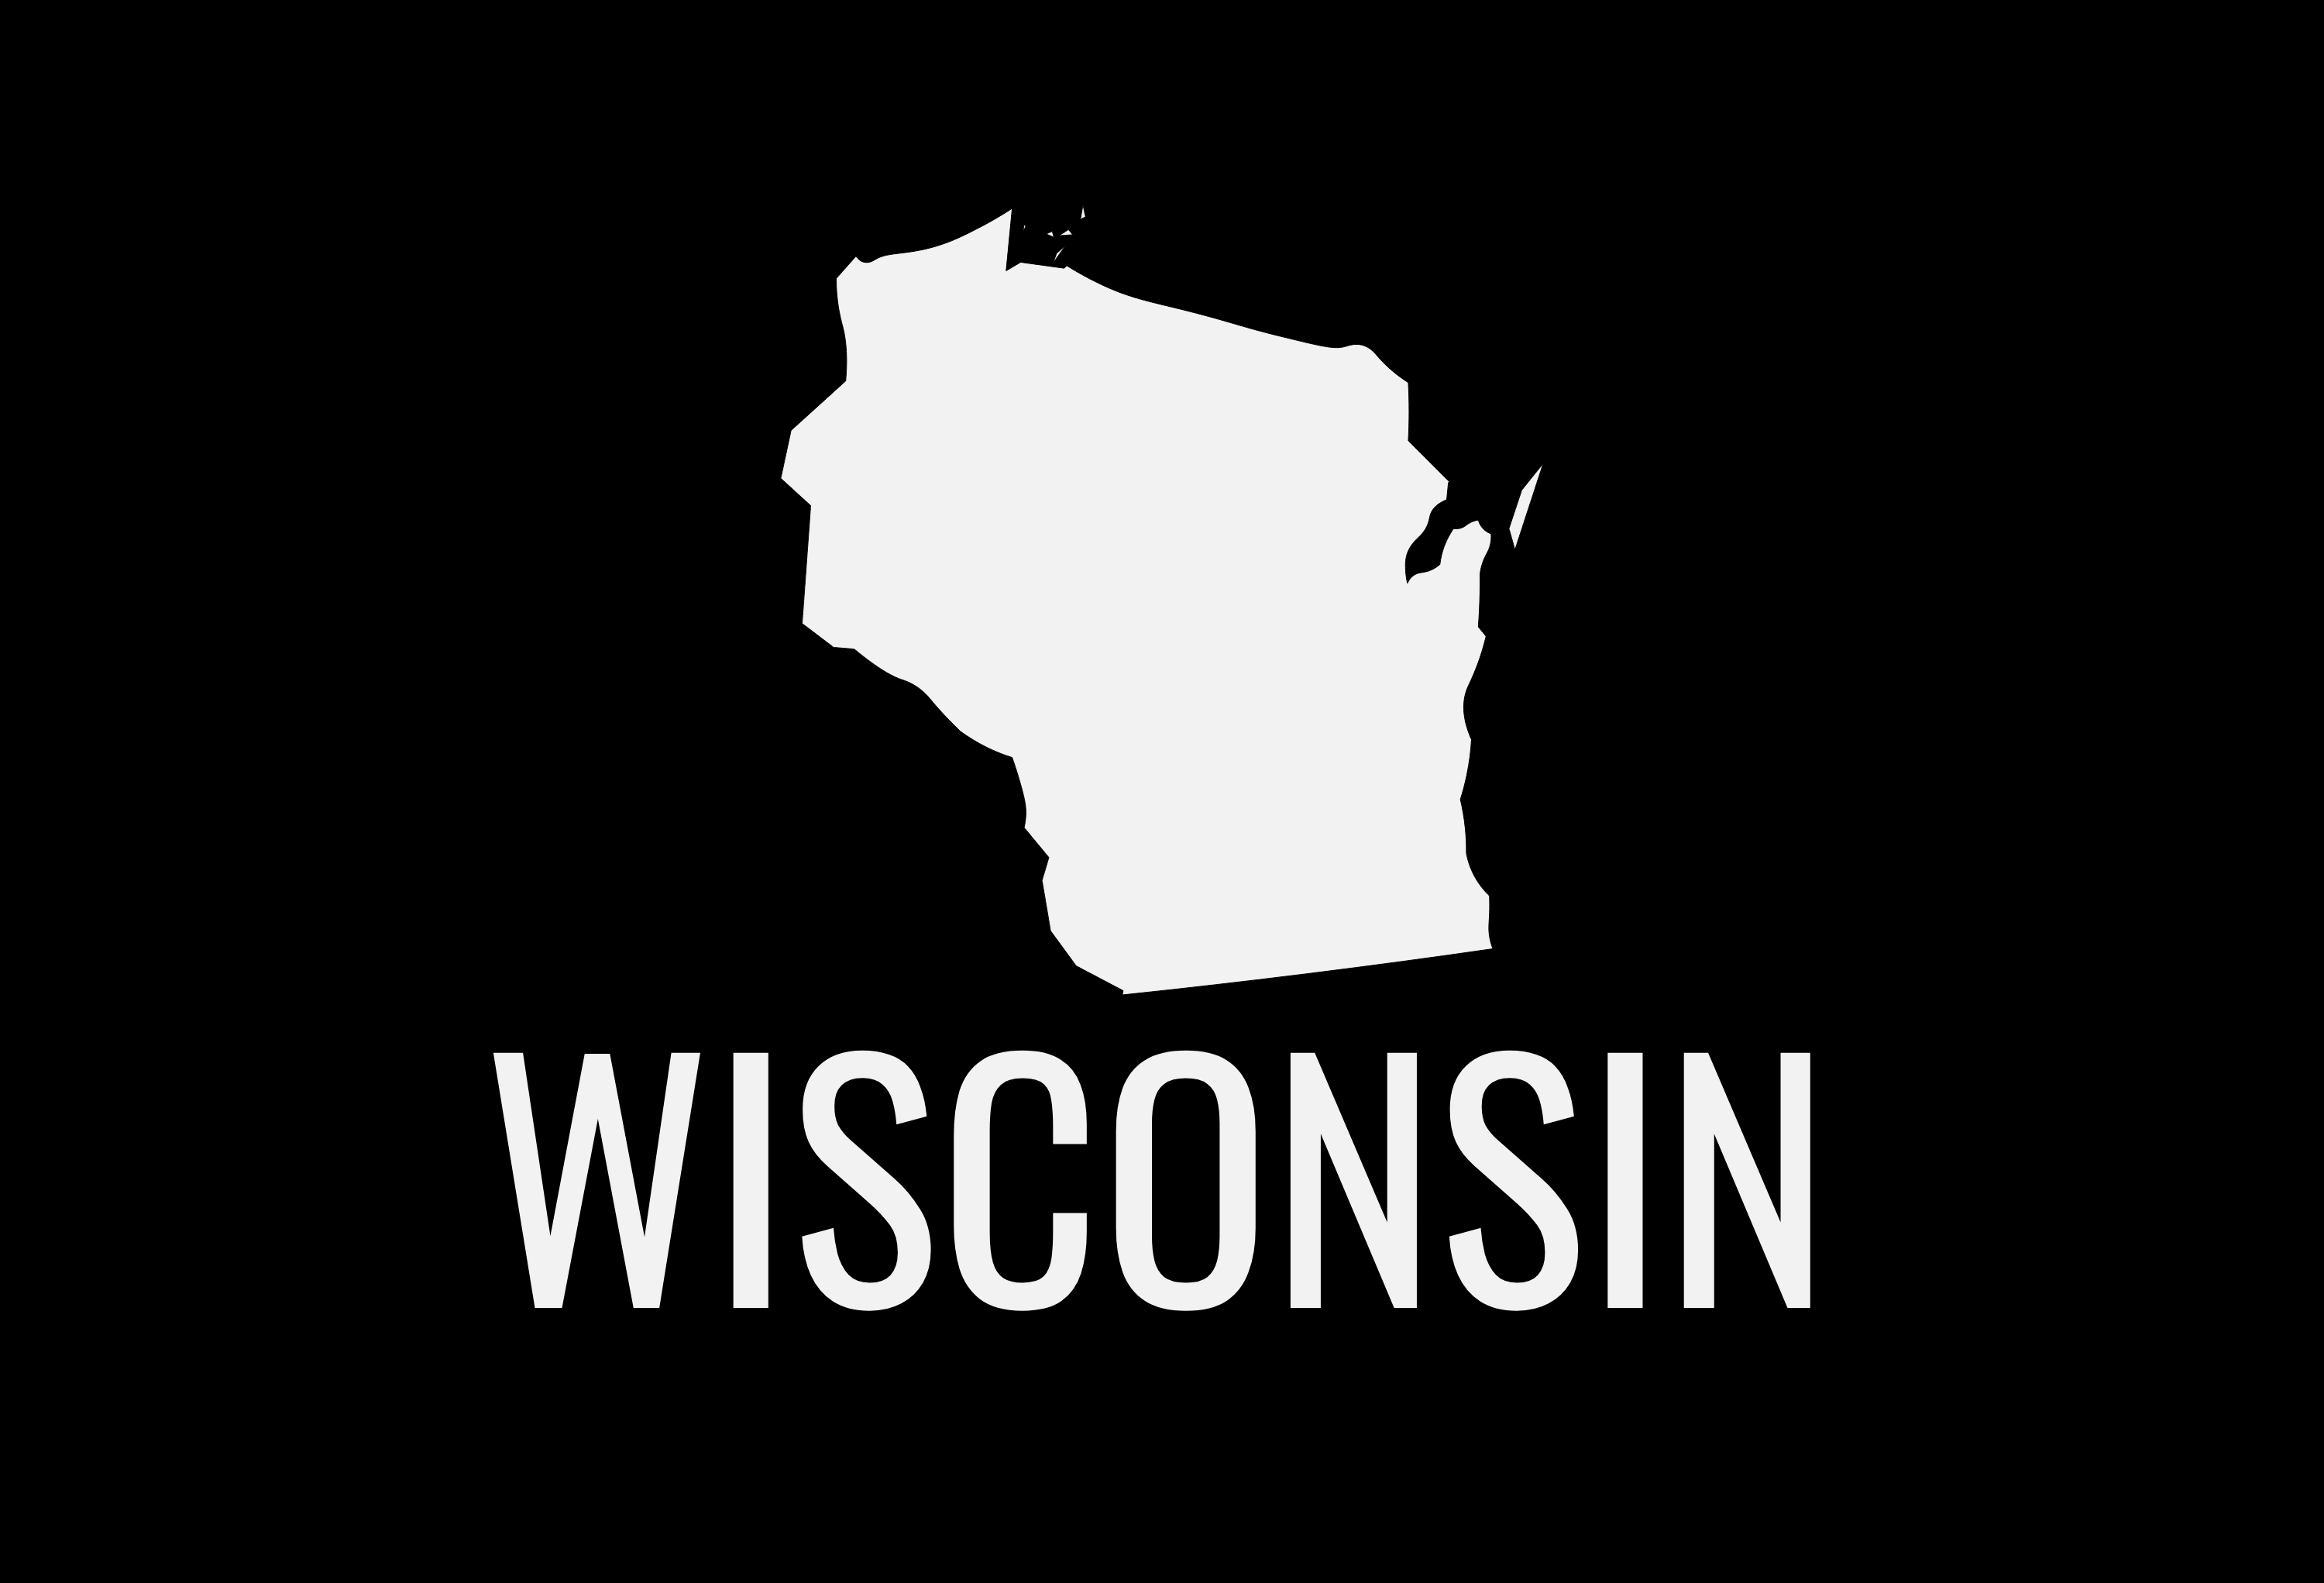 Wisconsin State Map Car Decal - Permanent Vinyl Sticker for Cars, Vehicle, Doors, Windows, Laptop, and more!